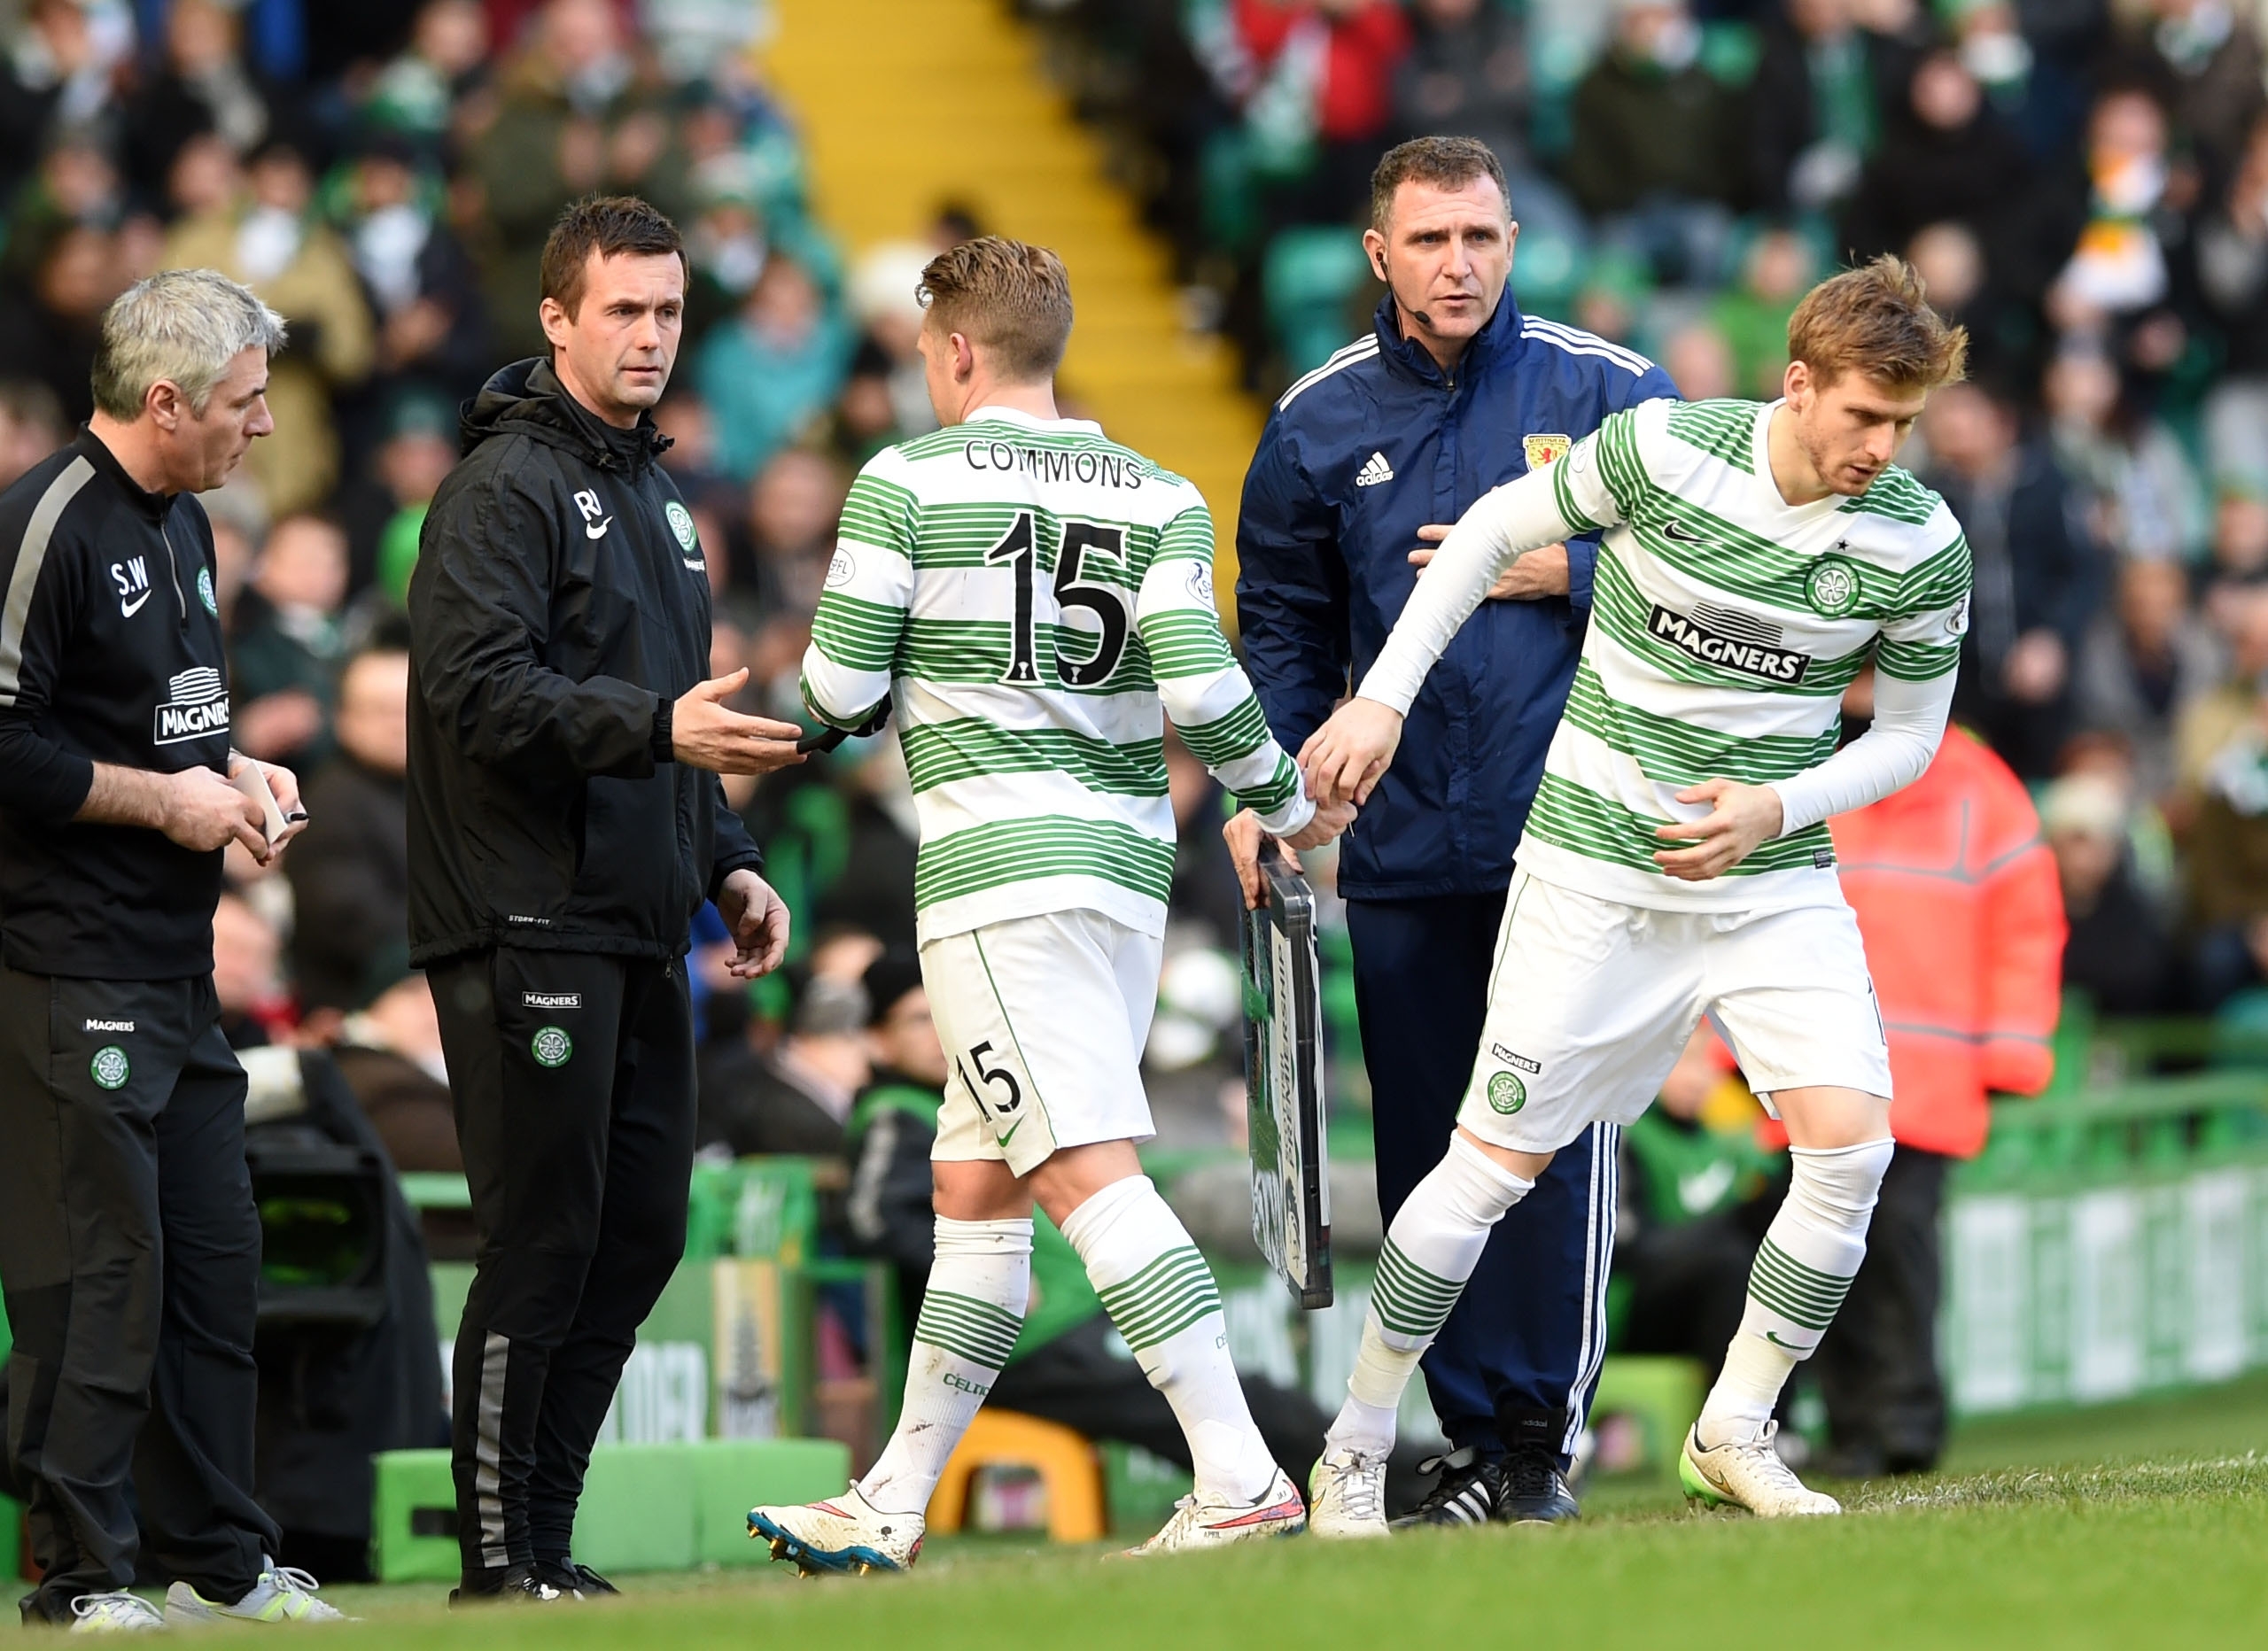 Kris Commons, who has been ruled out recently with a thigh injury, lasted just 11 minutes before he was replaced by Stuart Armstrong.